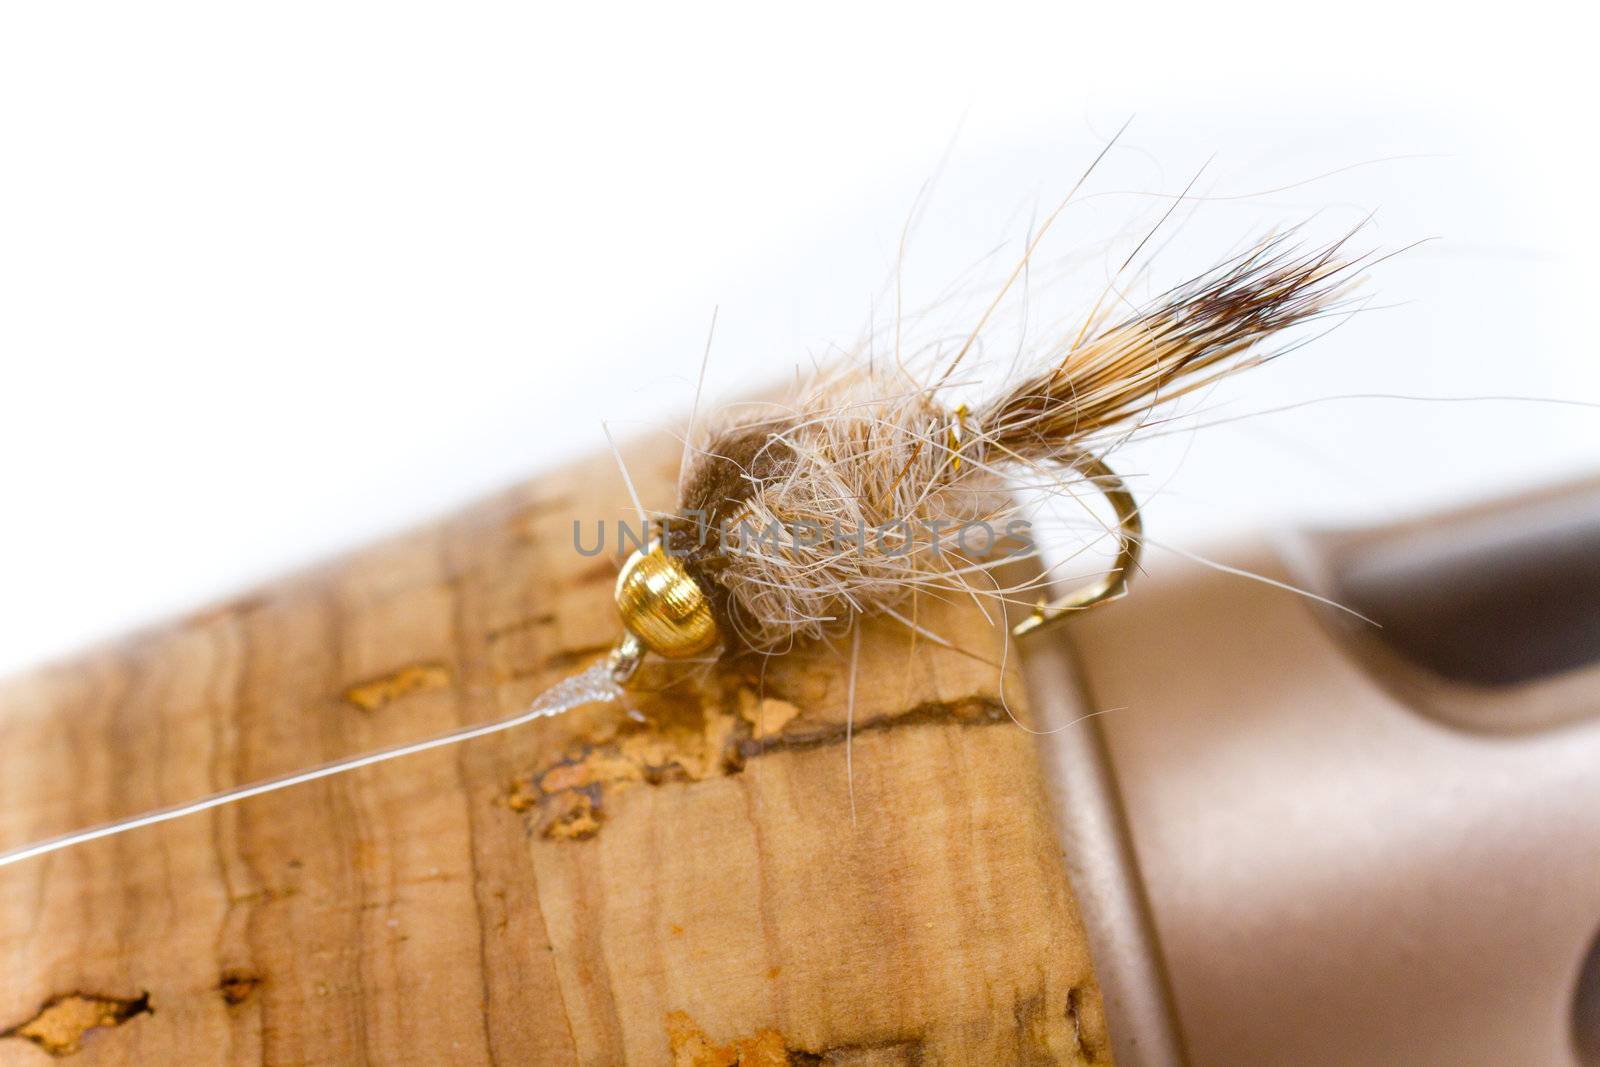 Hares Ear Nymph on Fly Rod by joshuaraineyphotography